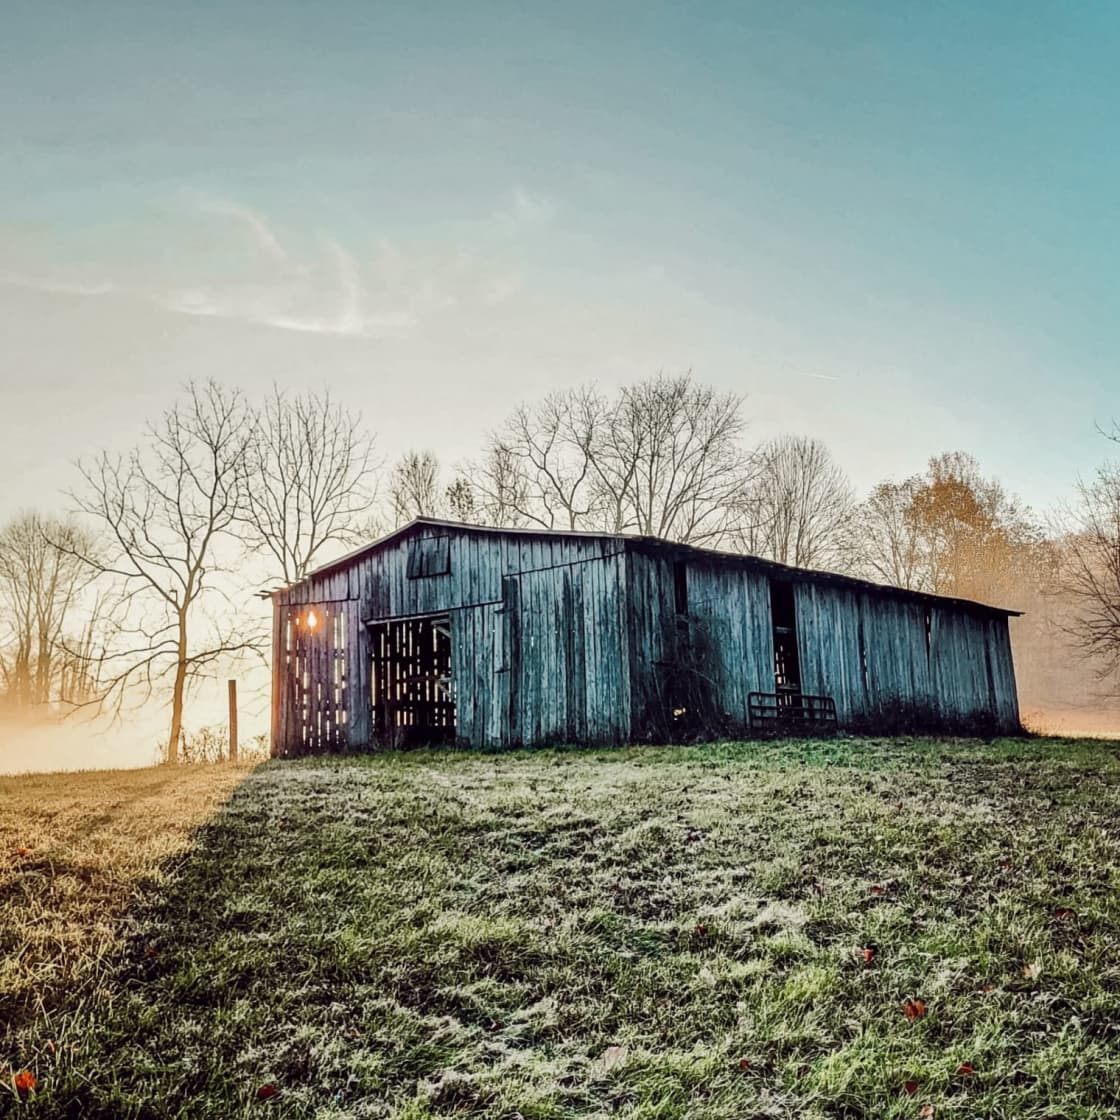 This old tobacco barn is positioned in a back field.